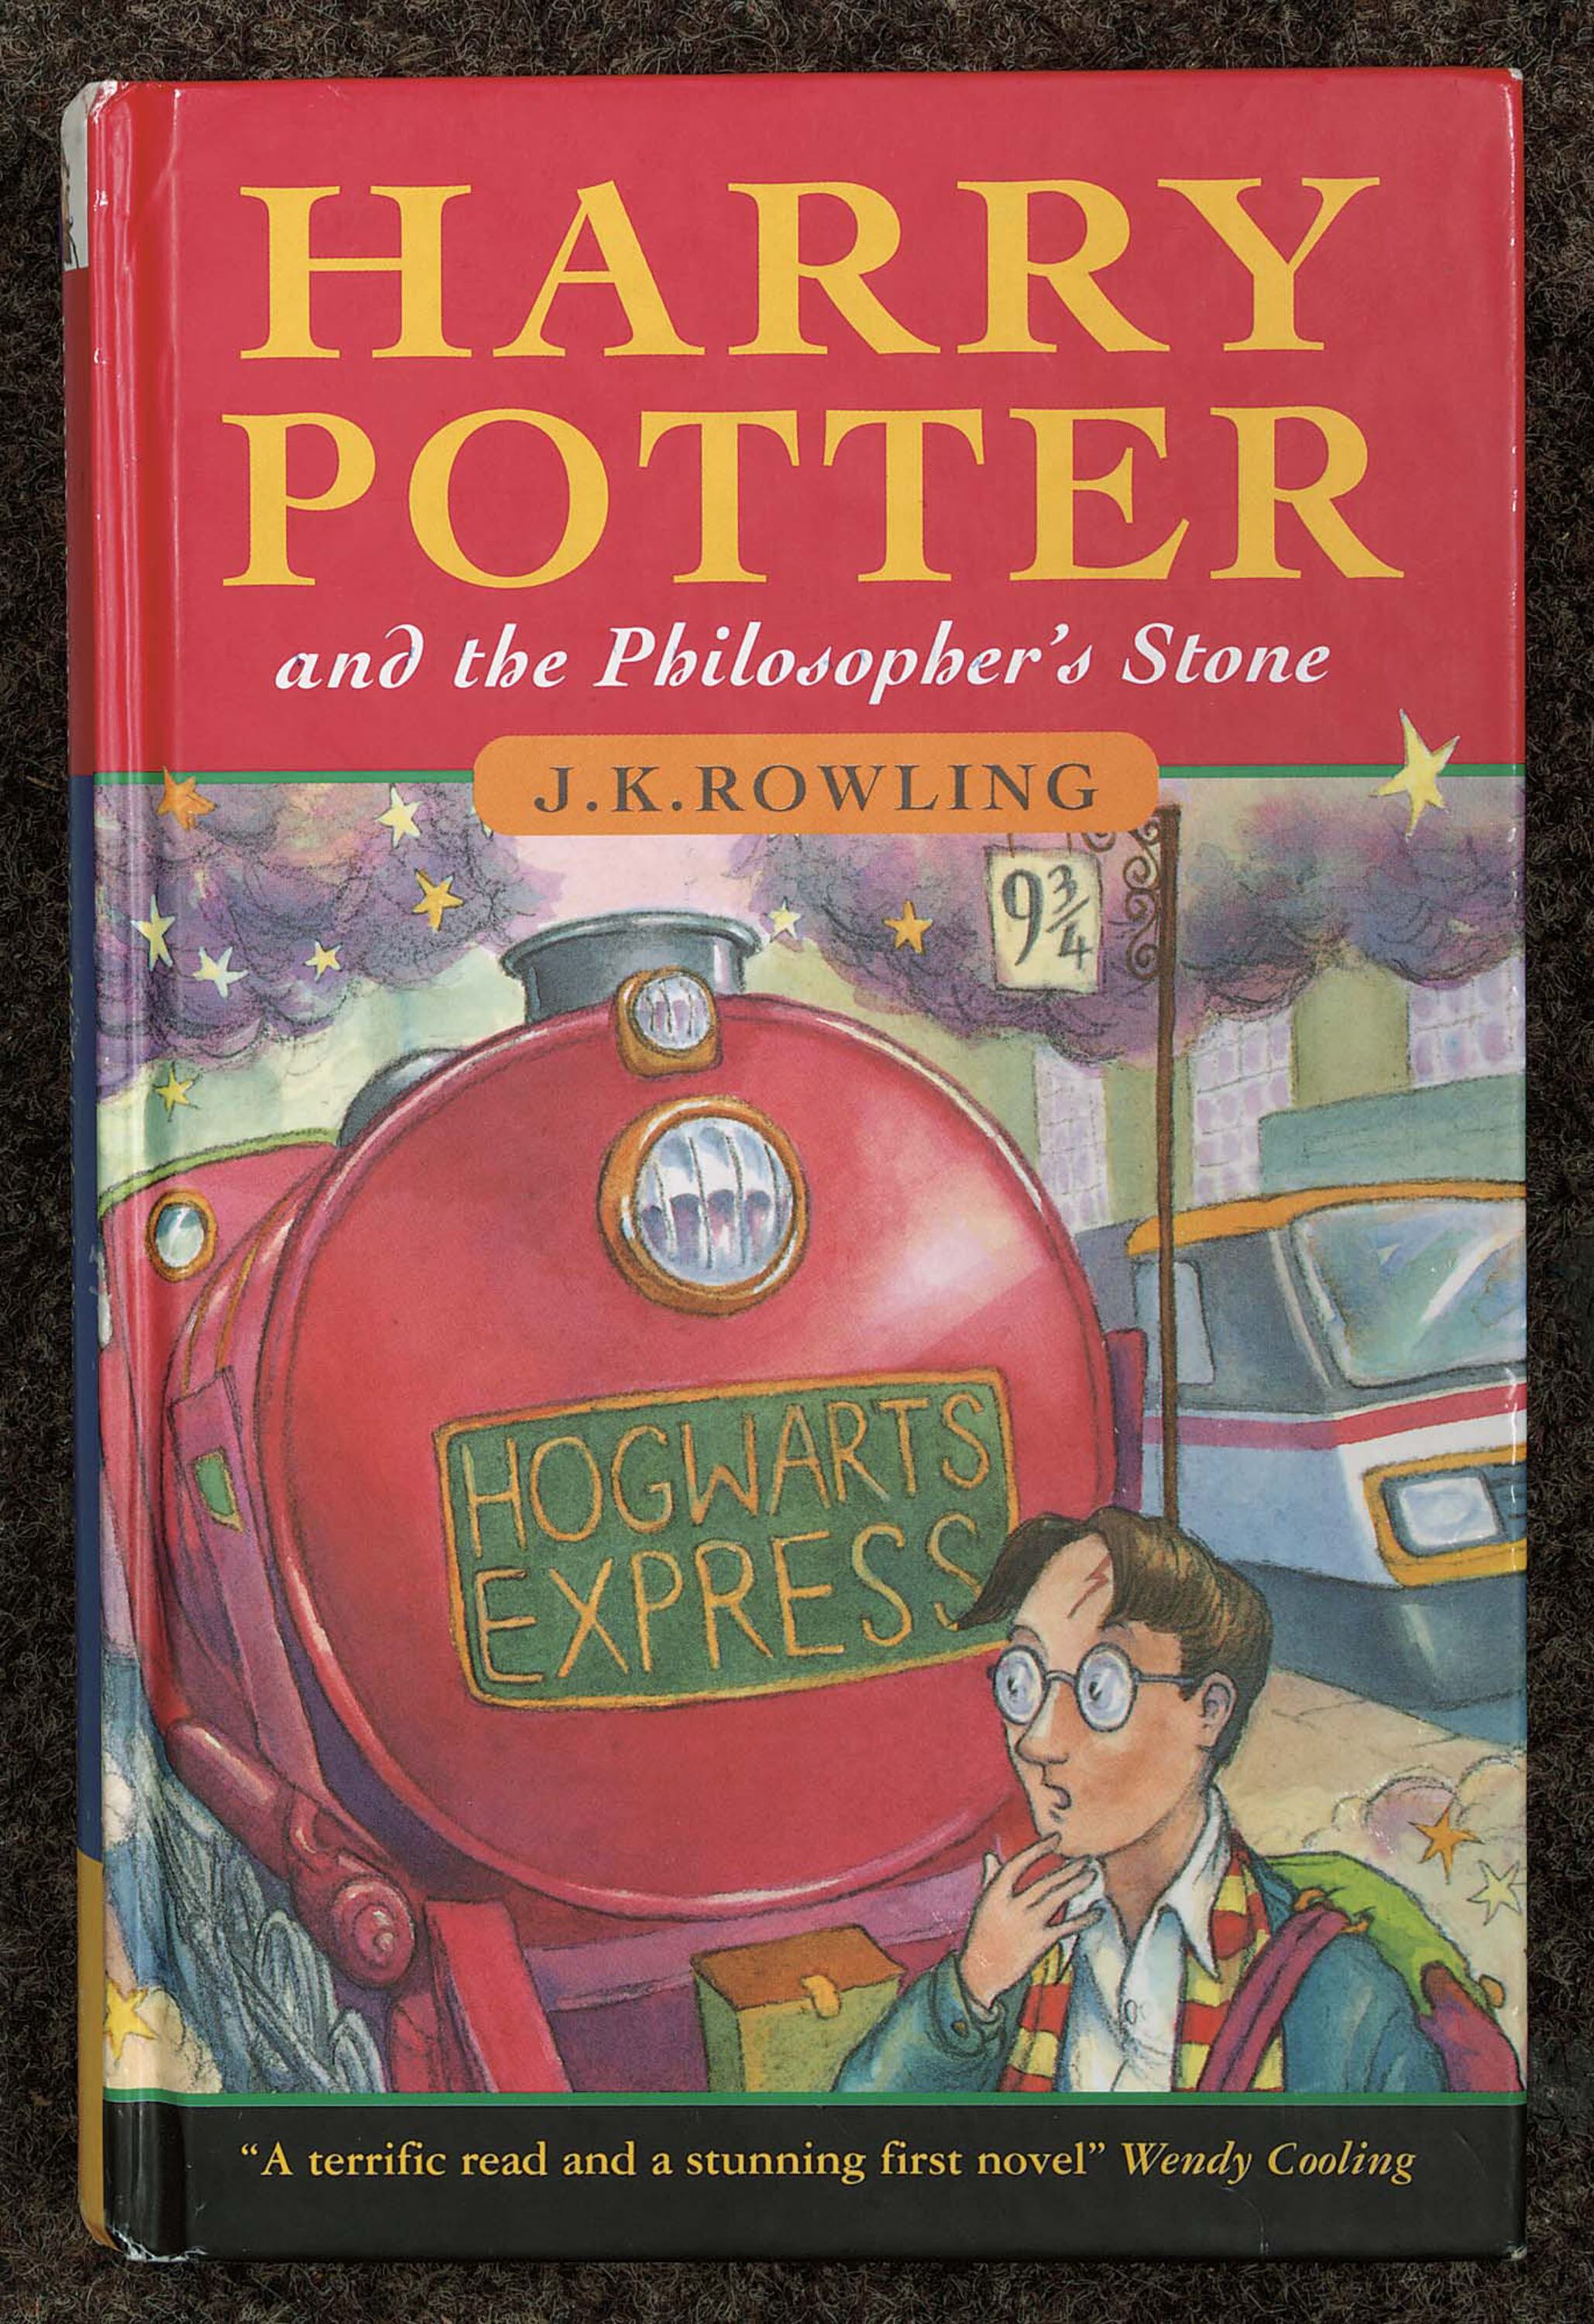 This handout from Christie's shows the cover of J.K. Rowling's first novel Harry Potter And The Philosopher's Stone.